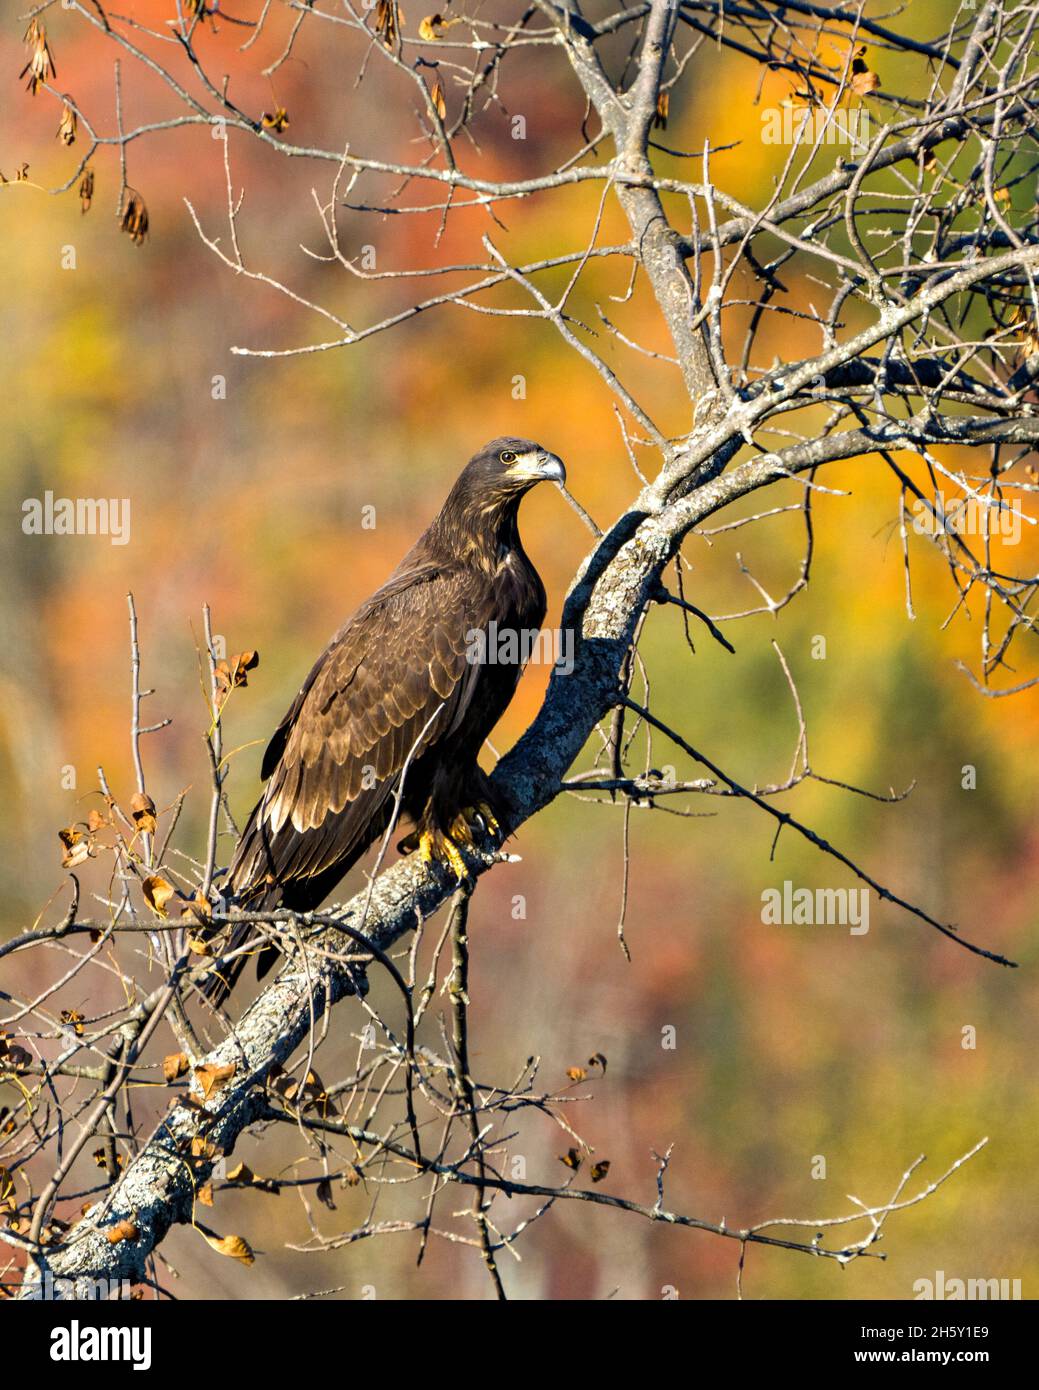 Bald Eagle perched with a autumn blur background in its environment and habitat surrounding and displaying its dark brown plumage,. Eagle Juvenile . Stock Photo